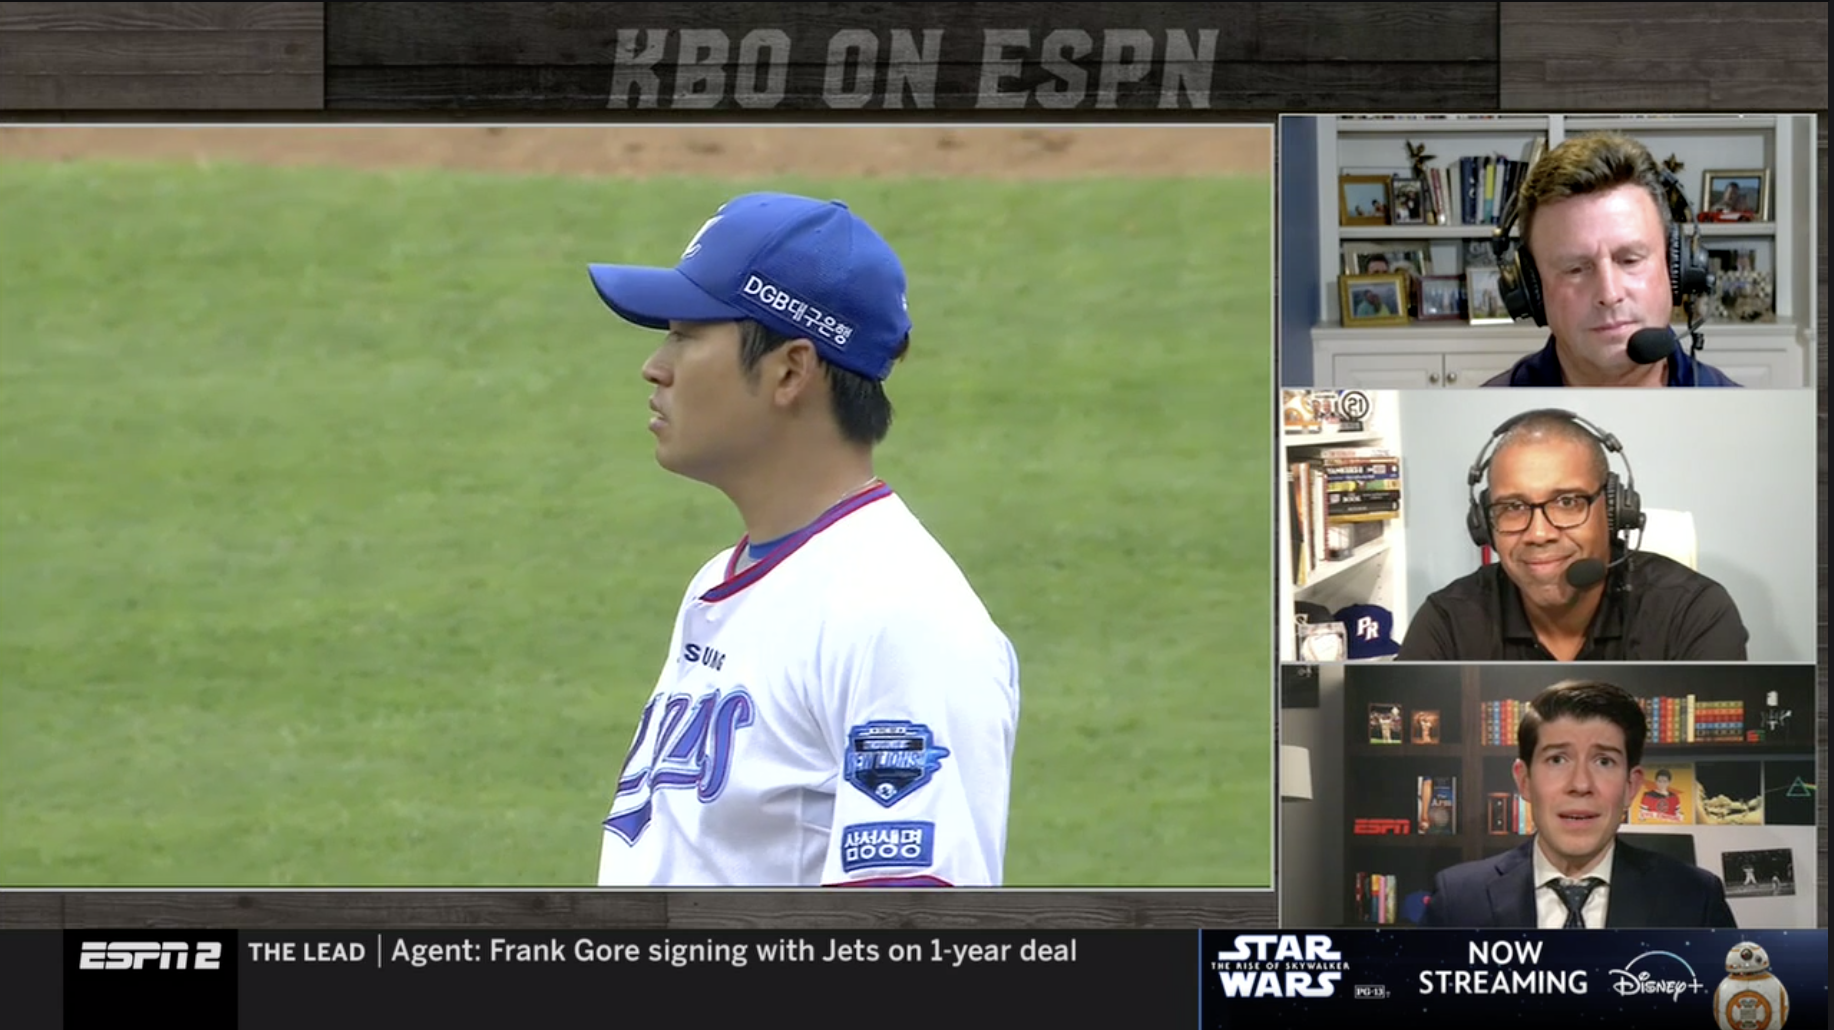 Baseball For Breakfast ESPNs Early Morning, Live KBO Telecasts Making An Impact